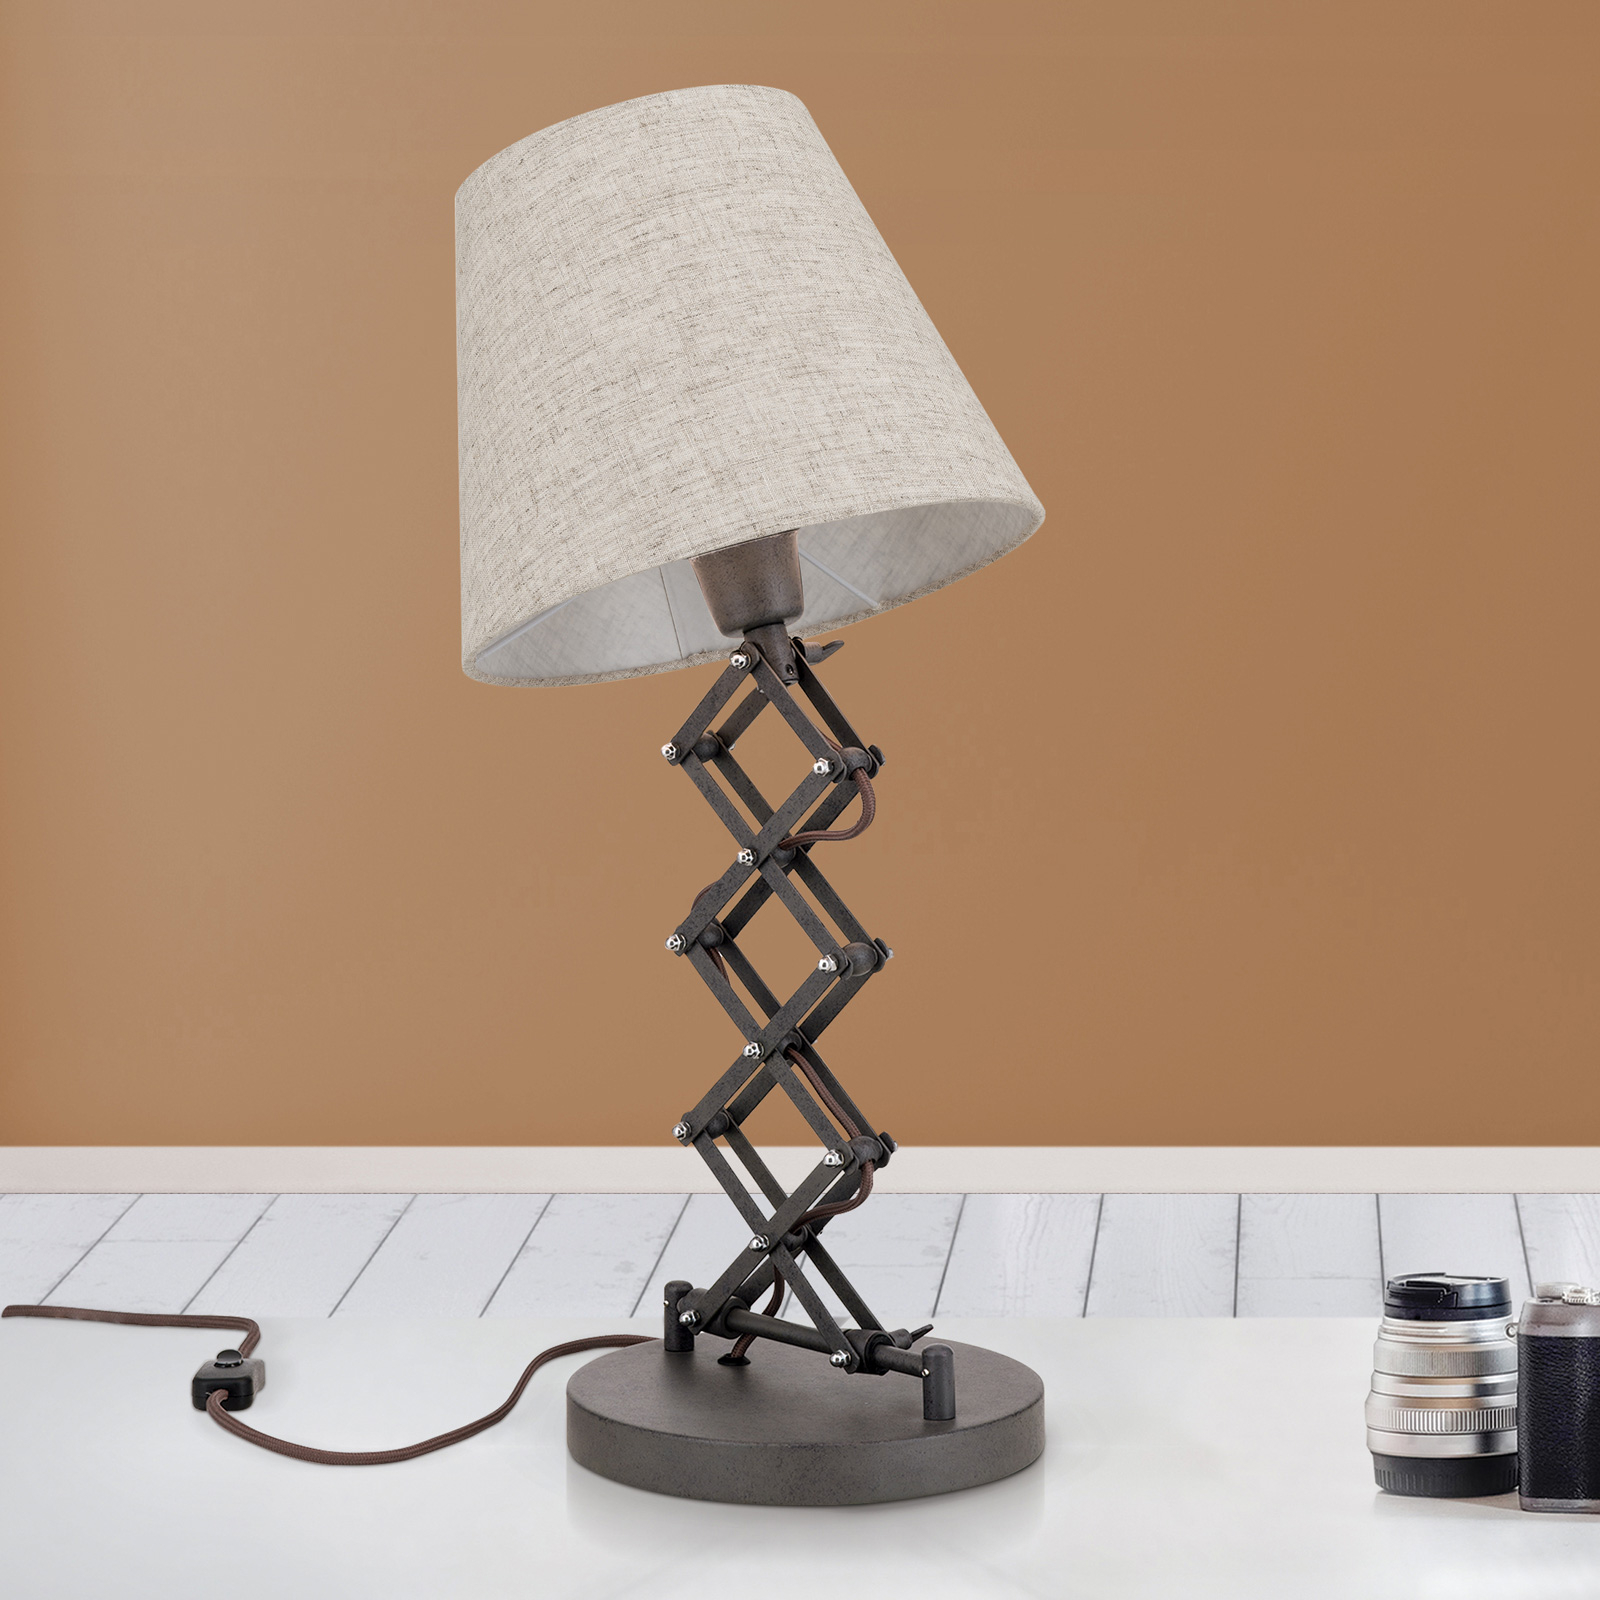 Factory table lamp in an industrial look